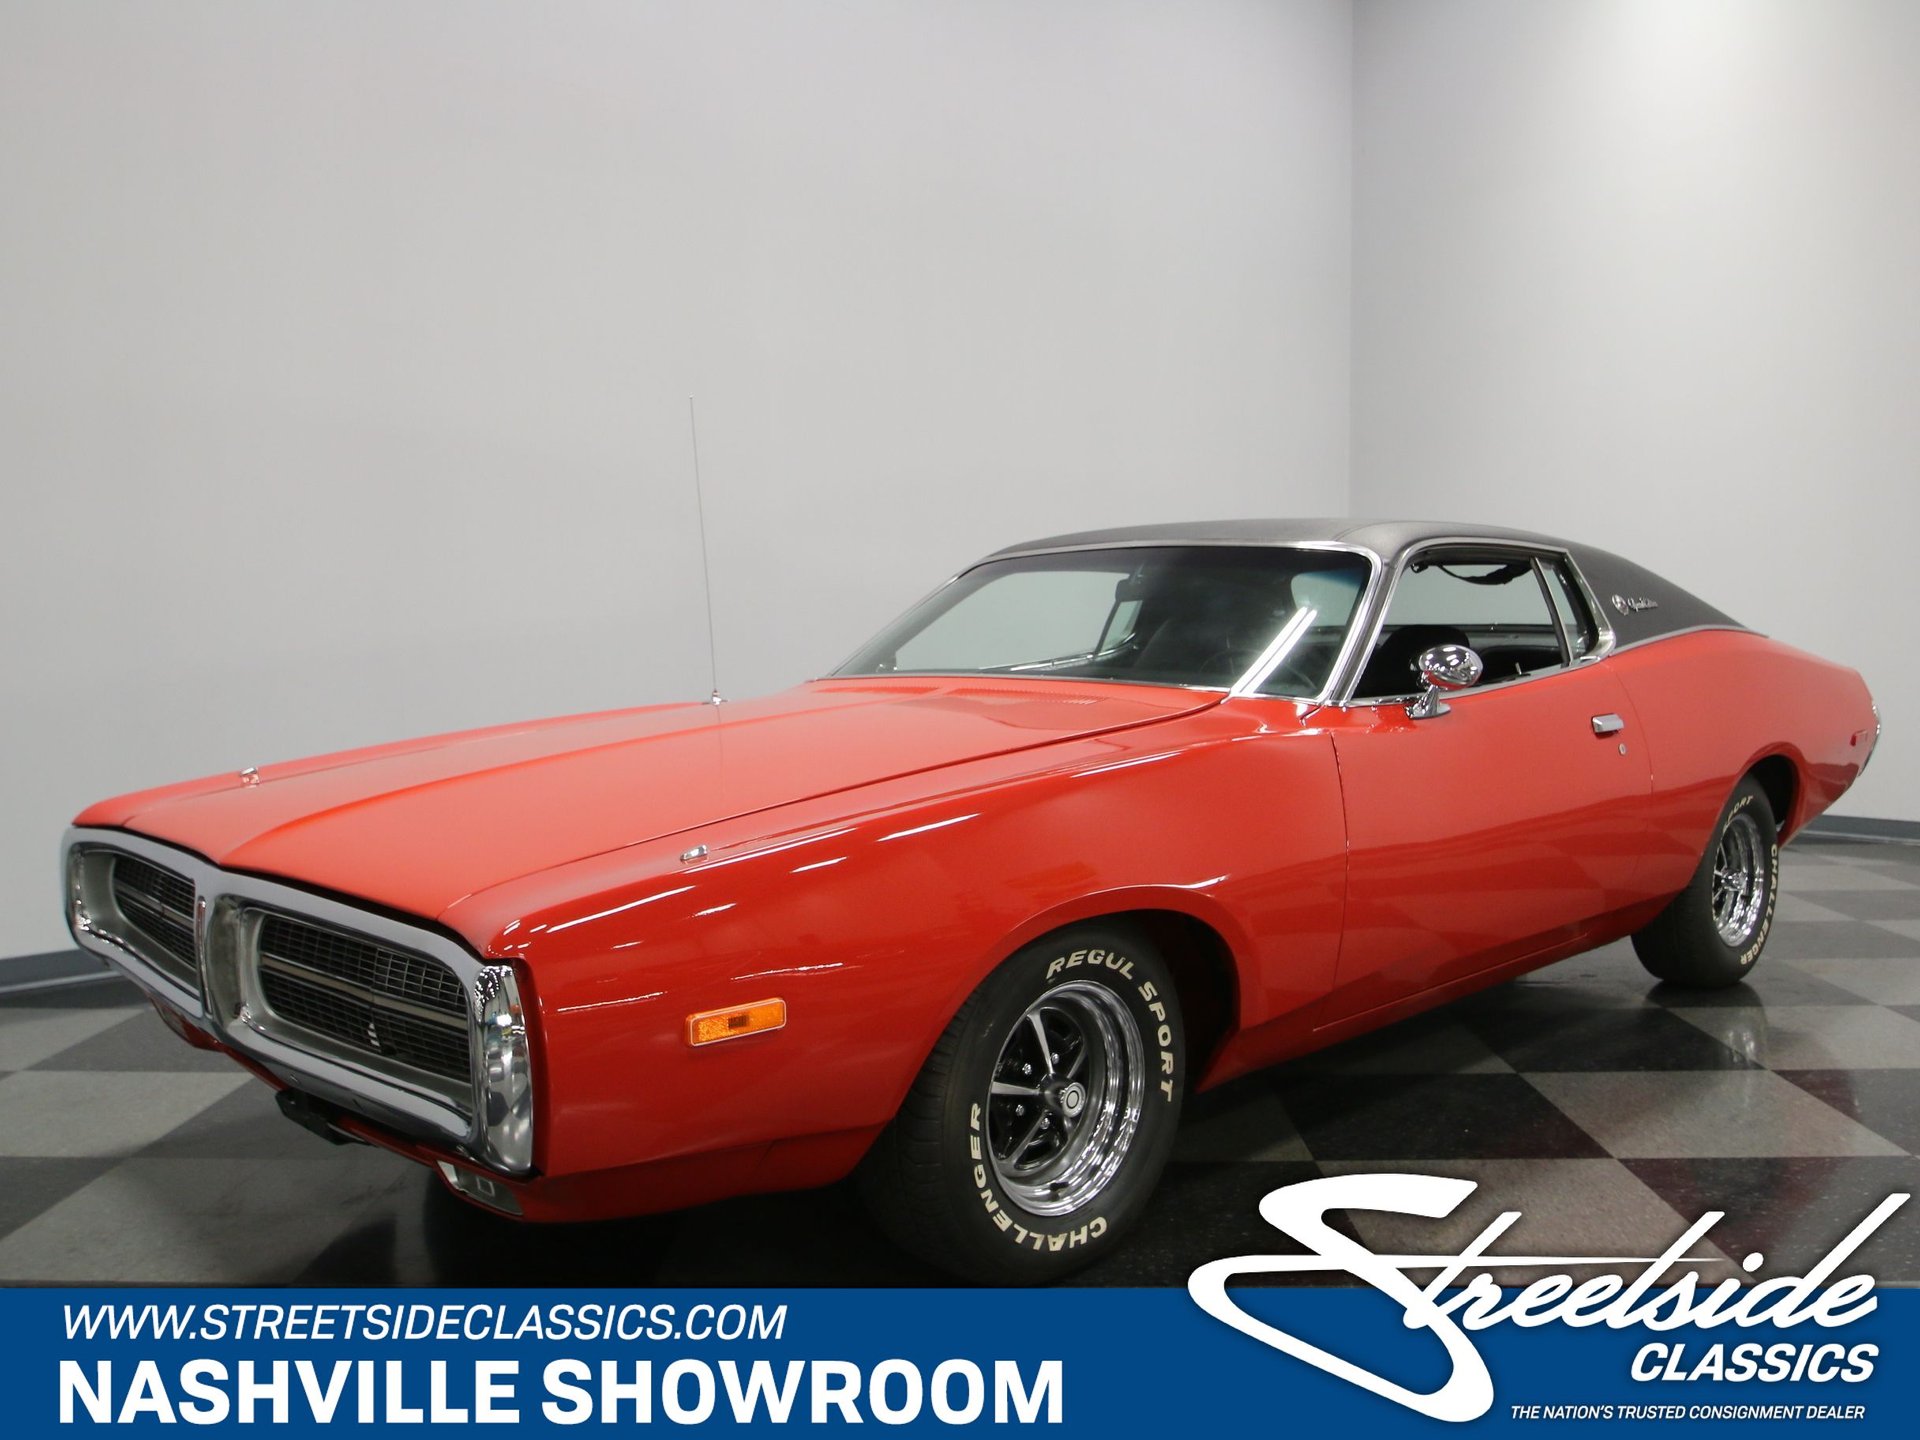 1972 Dodge Charger | Classic Cars for Sale - Streetside Classics